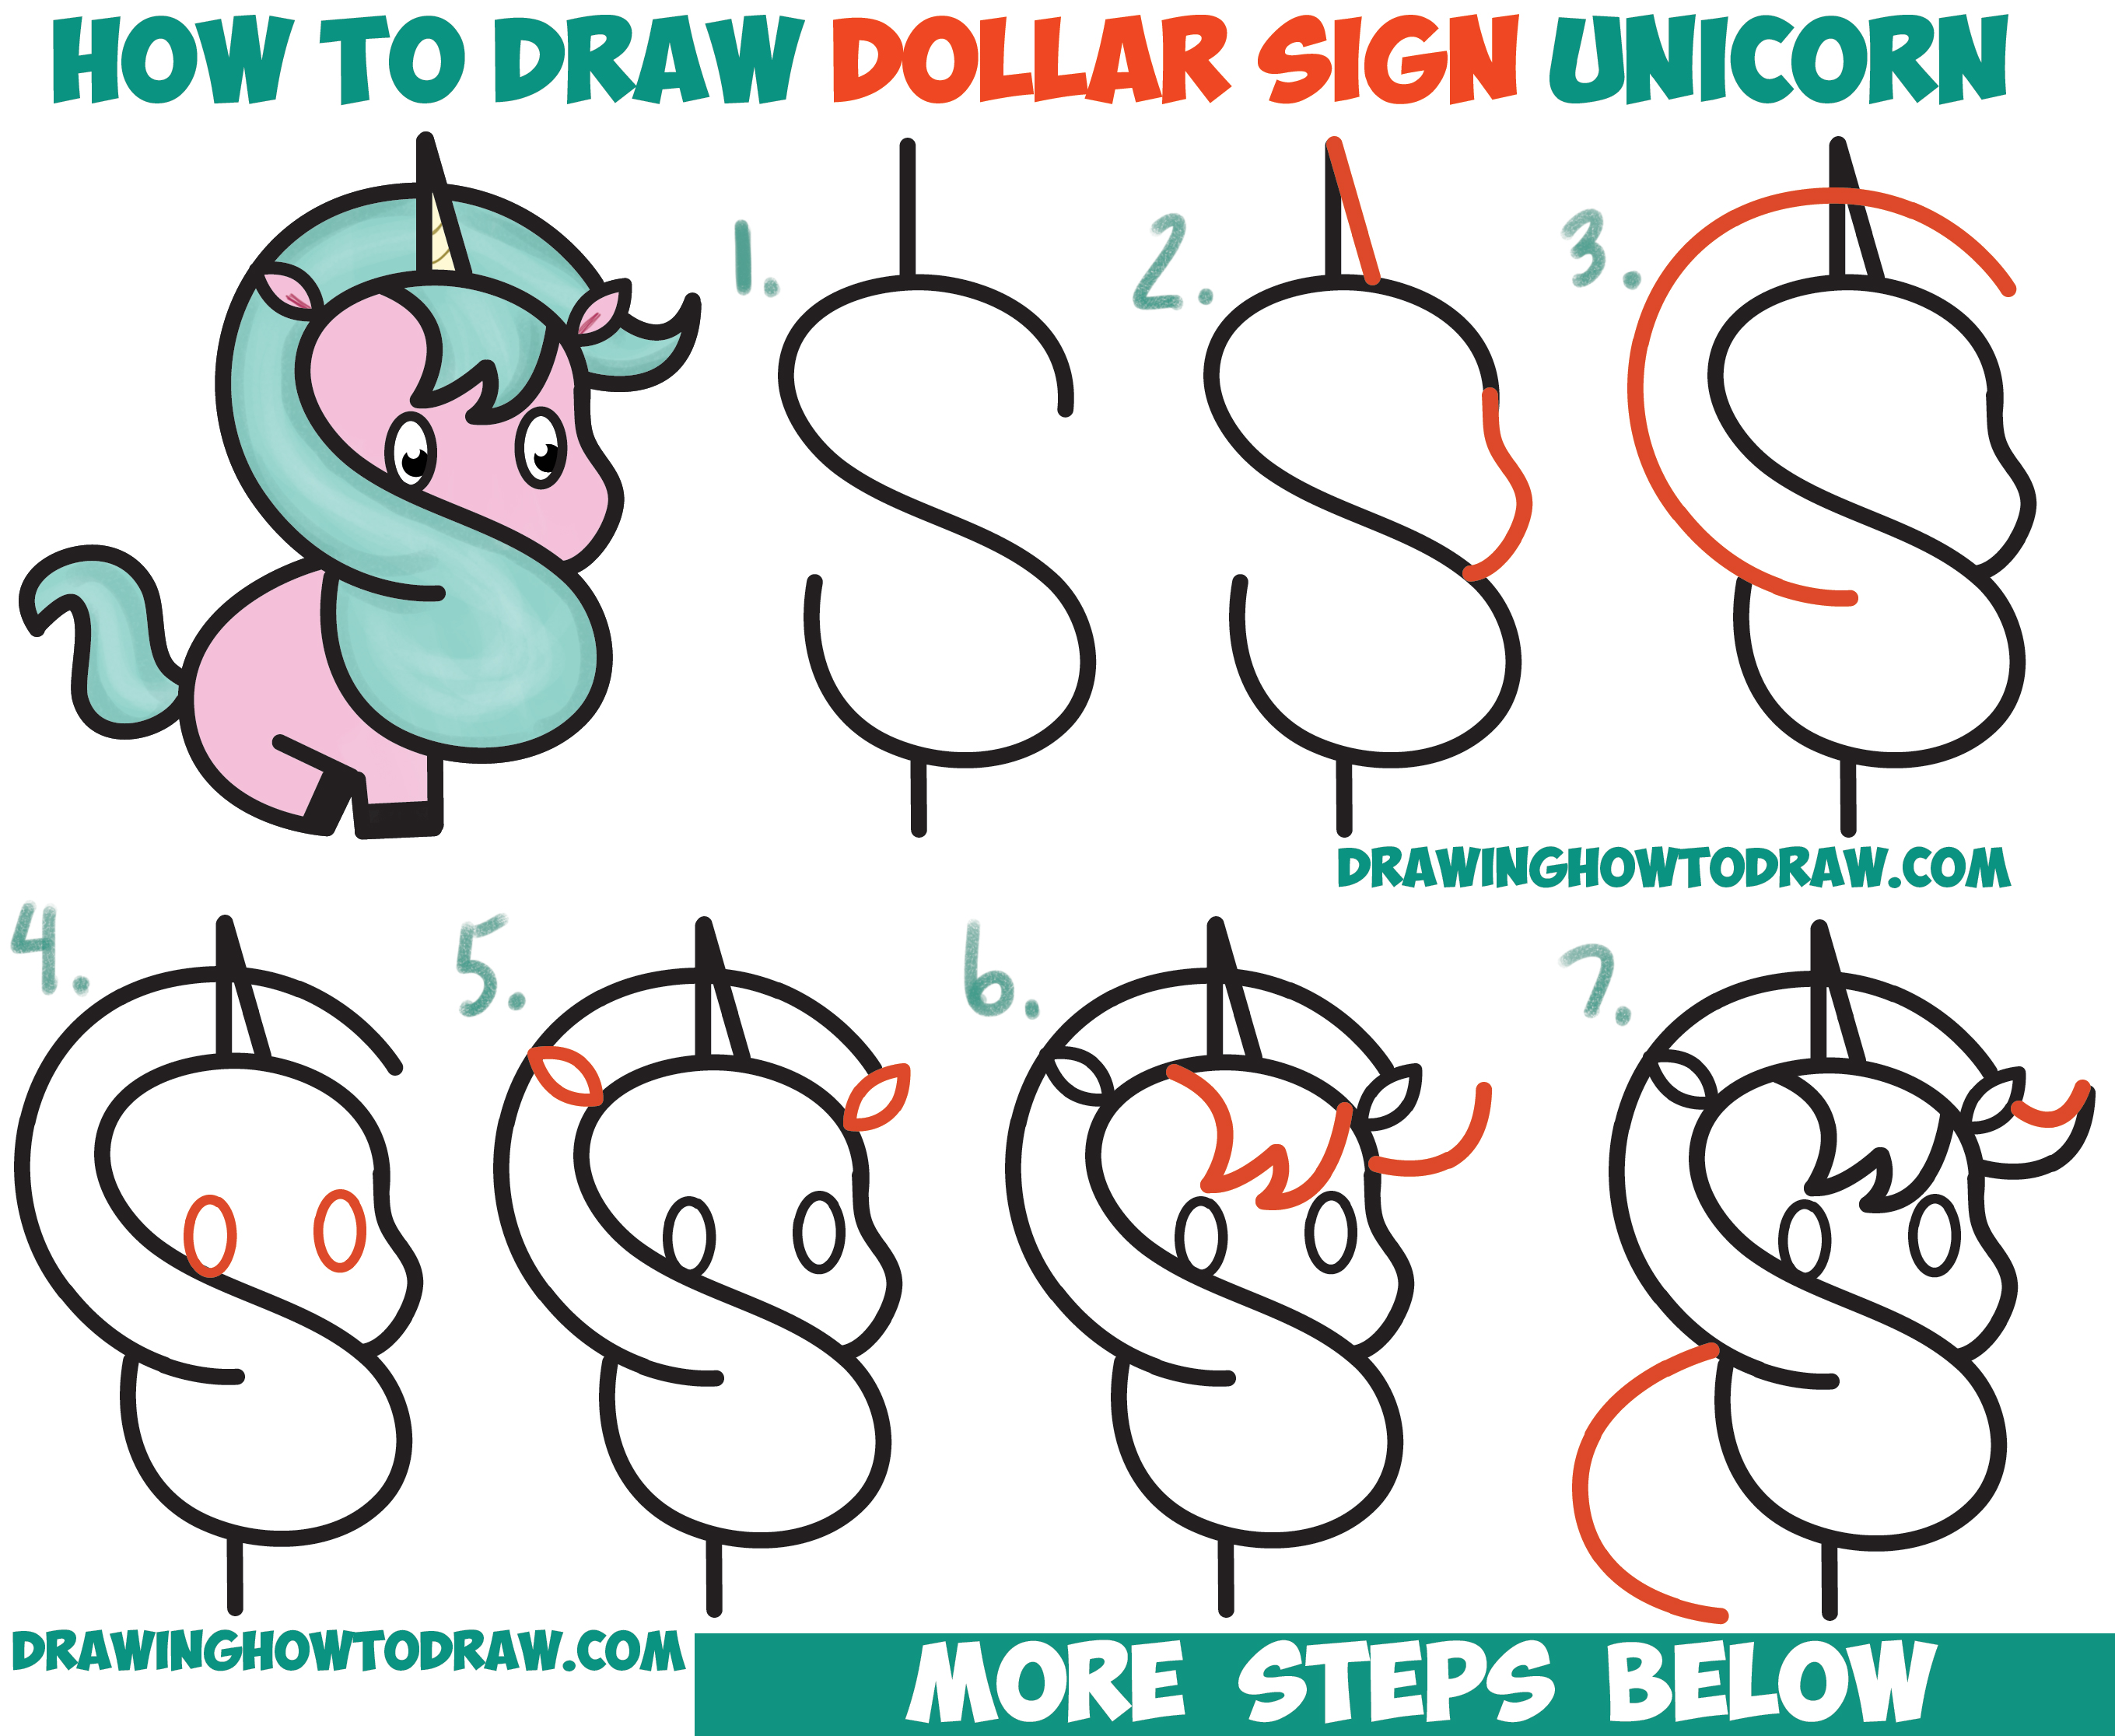 How To Draw A Unicorn For Kids  Unicorn drawing, Easy drawings, Learn to  draw